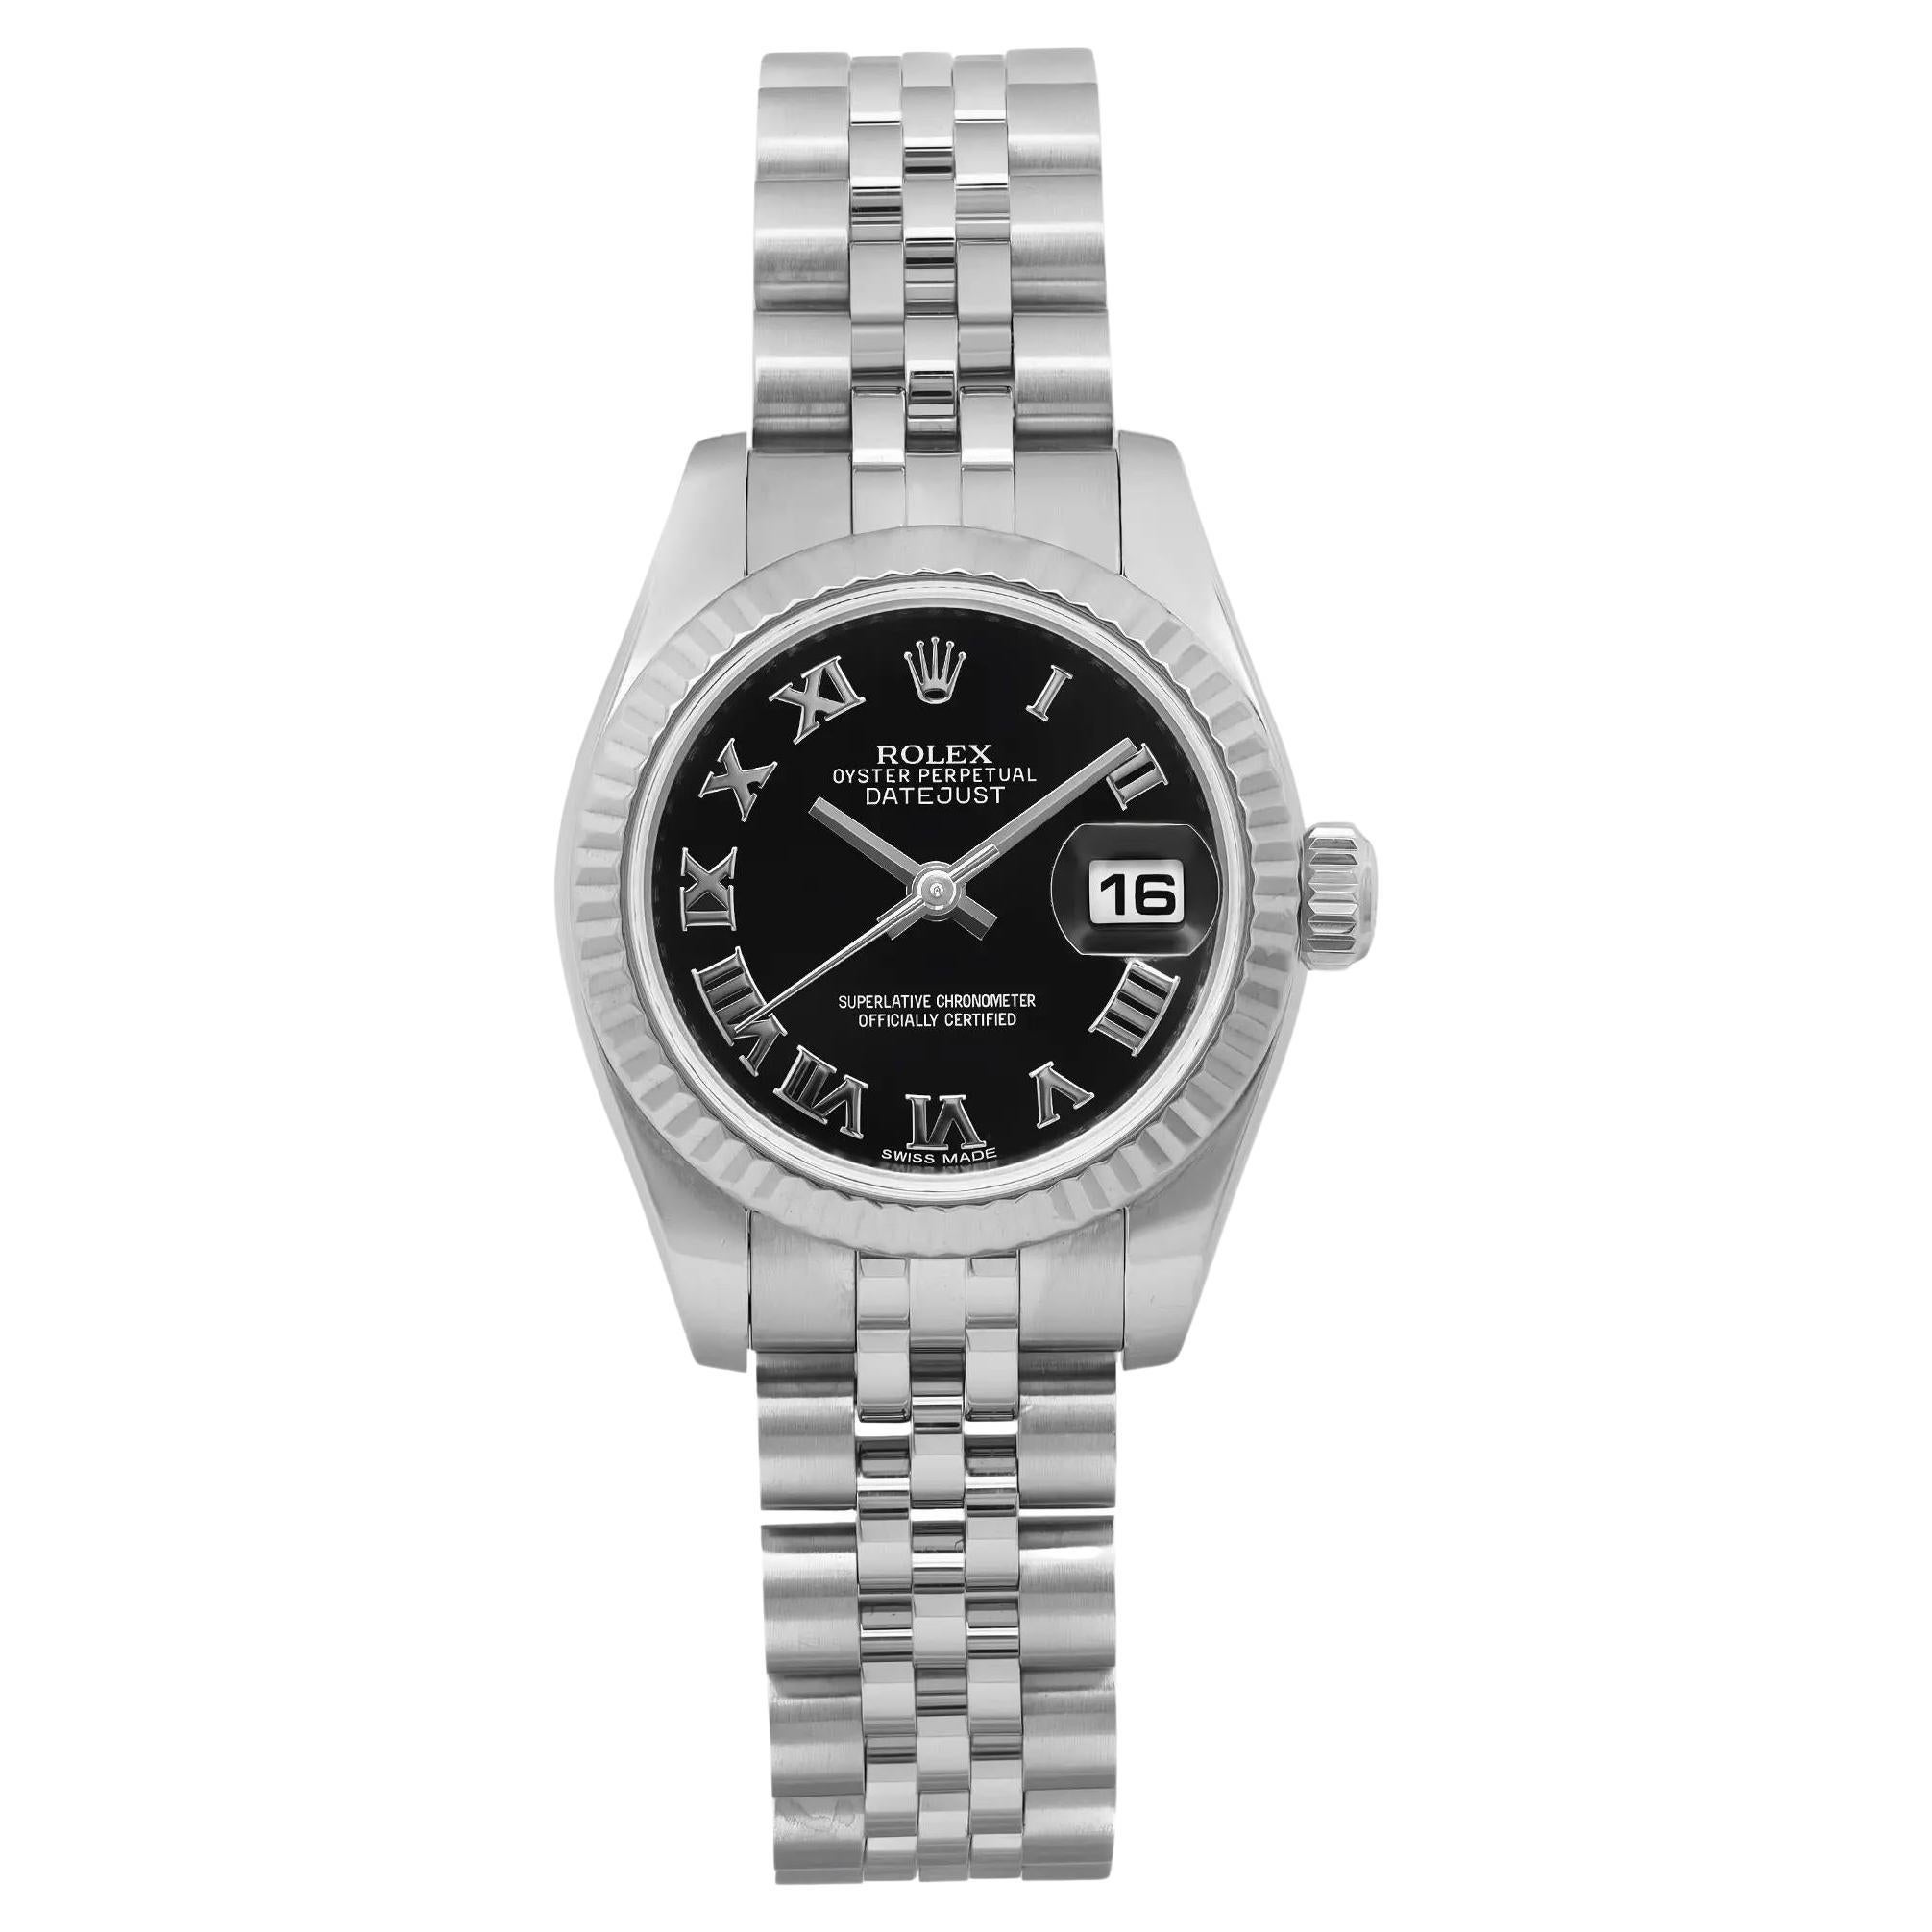 Rolex Lady-Datejust 26 18K White Gold Steel Black Roman Dial Watch 179174 For Sale